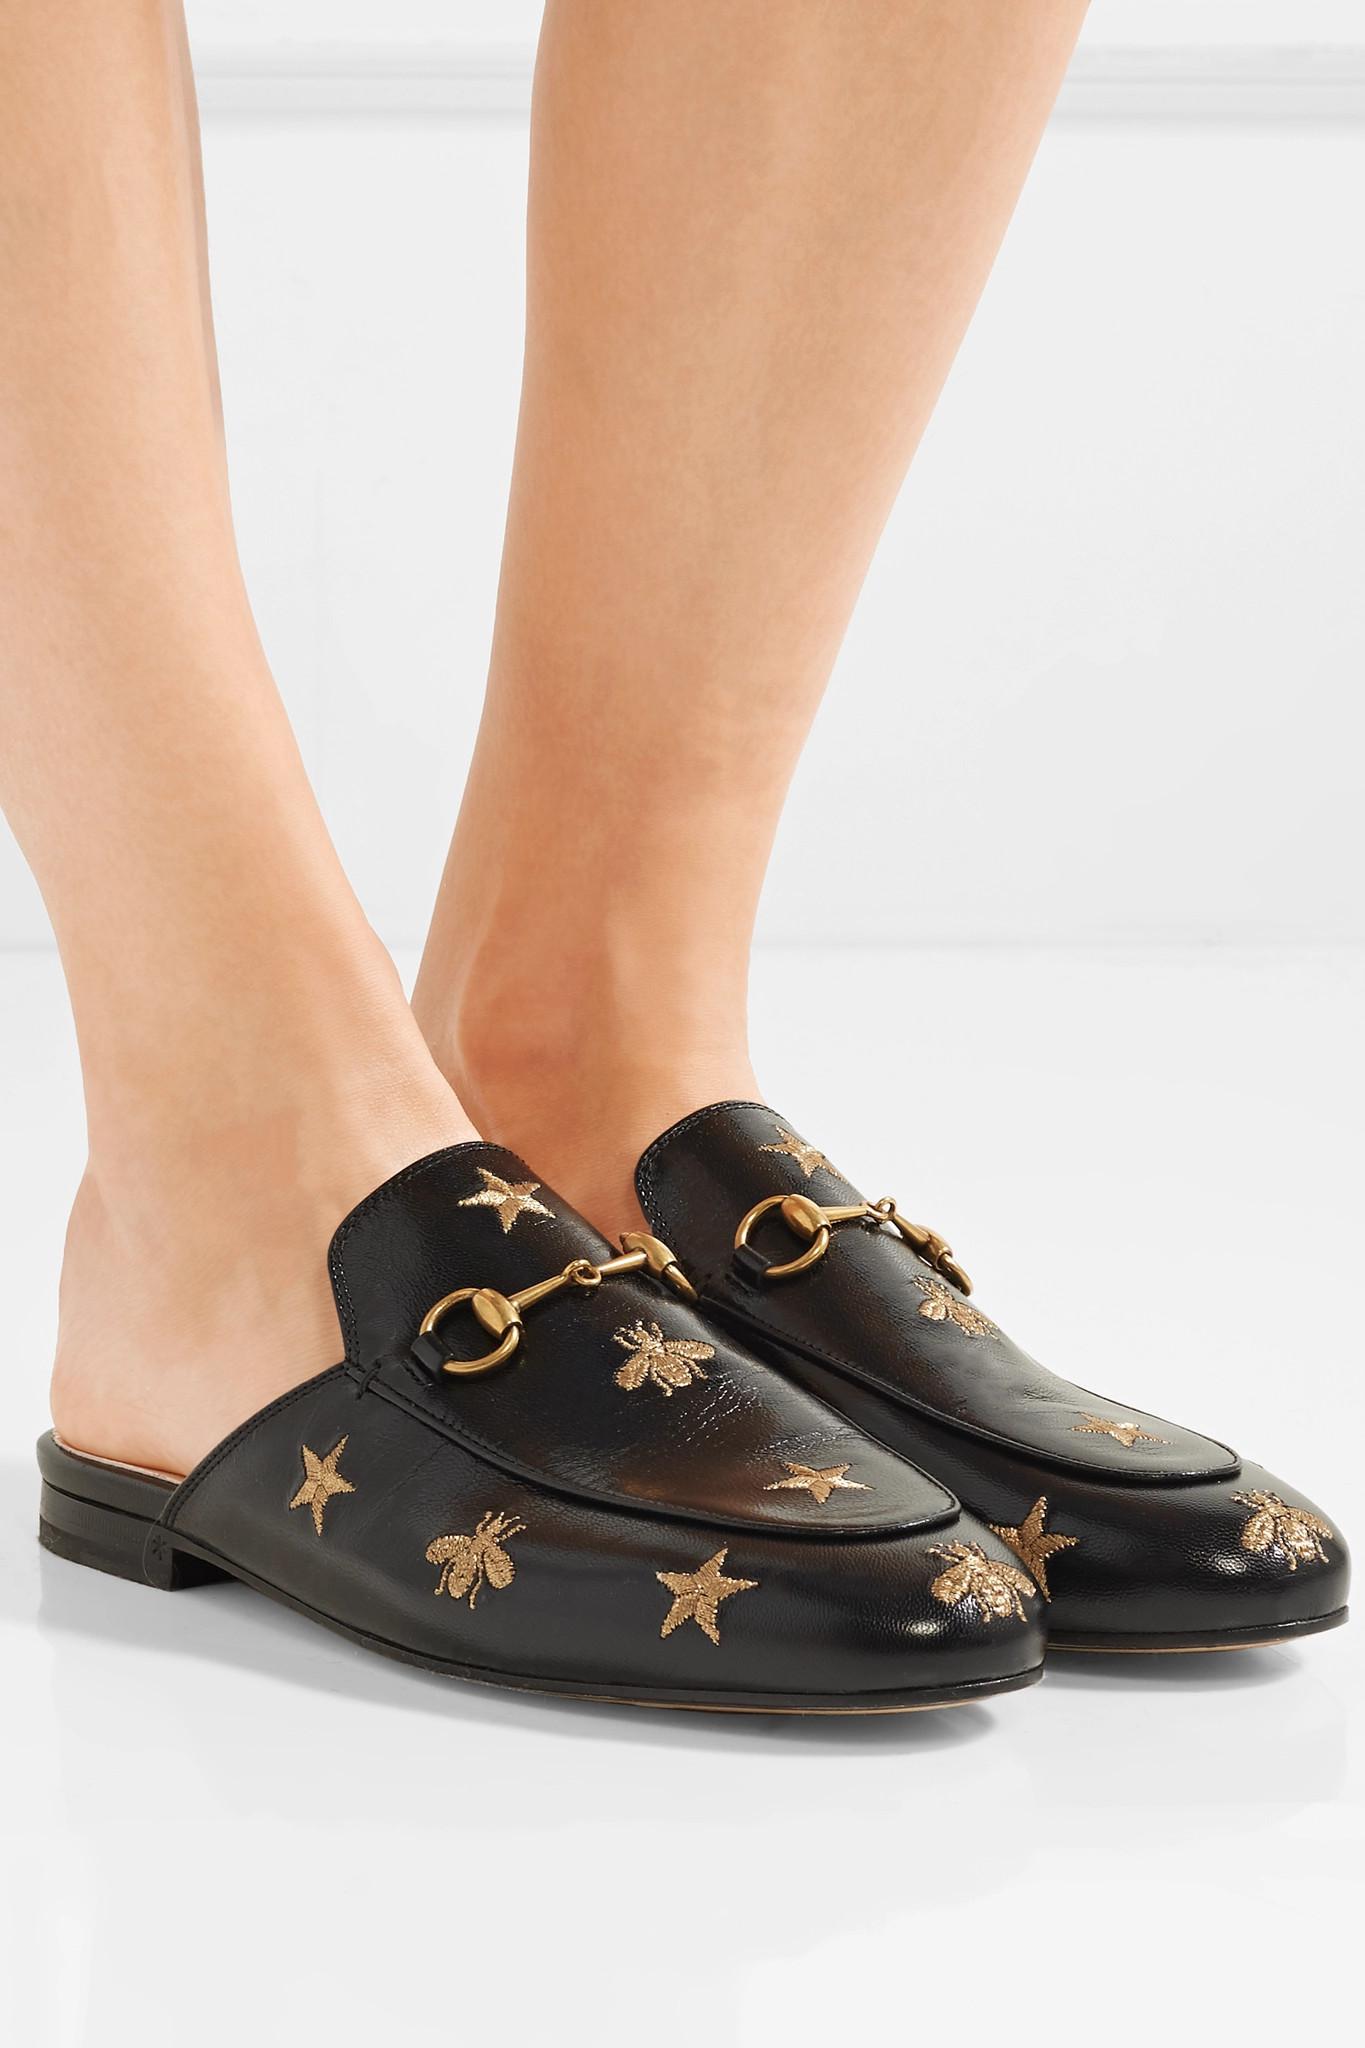 Gucci Embroidered Leather Slipper in Black (Black) - Save 22% - Lyst